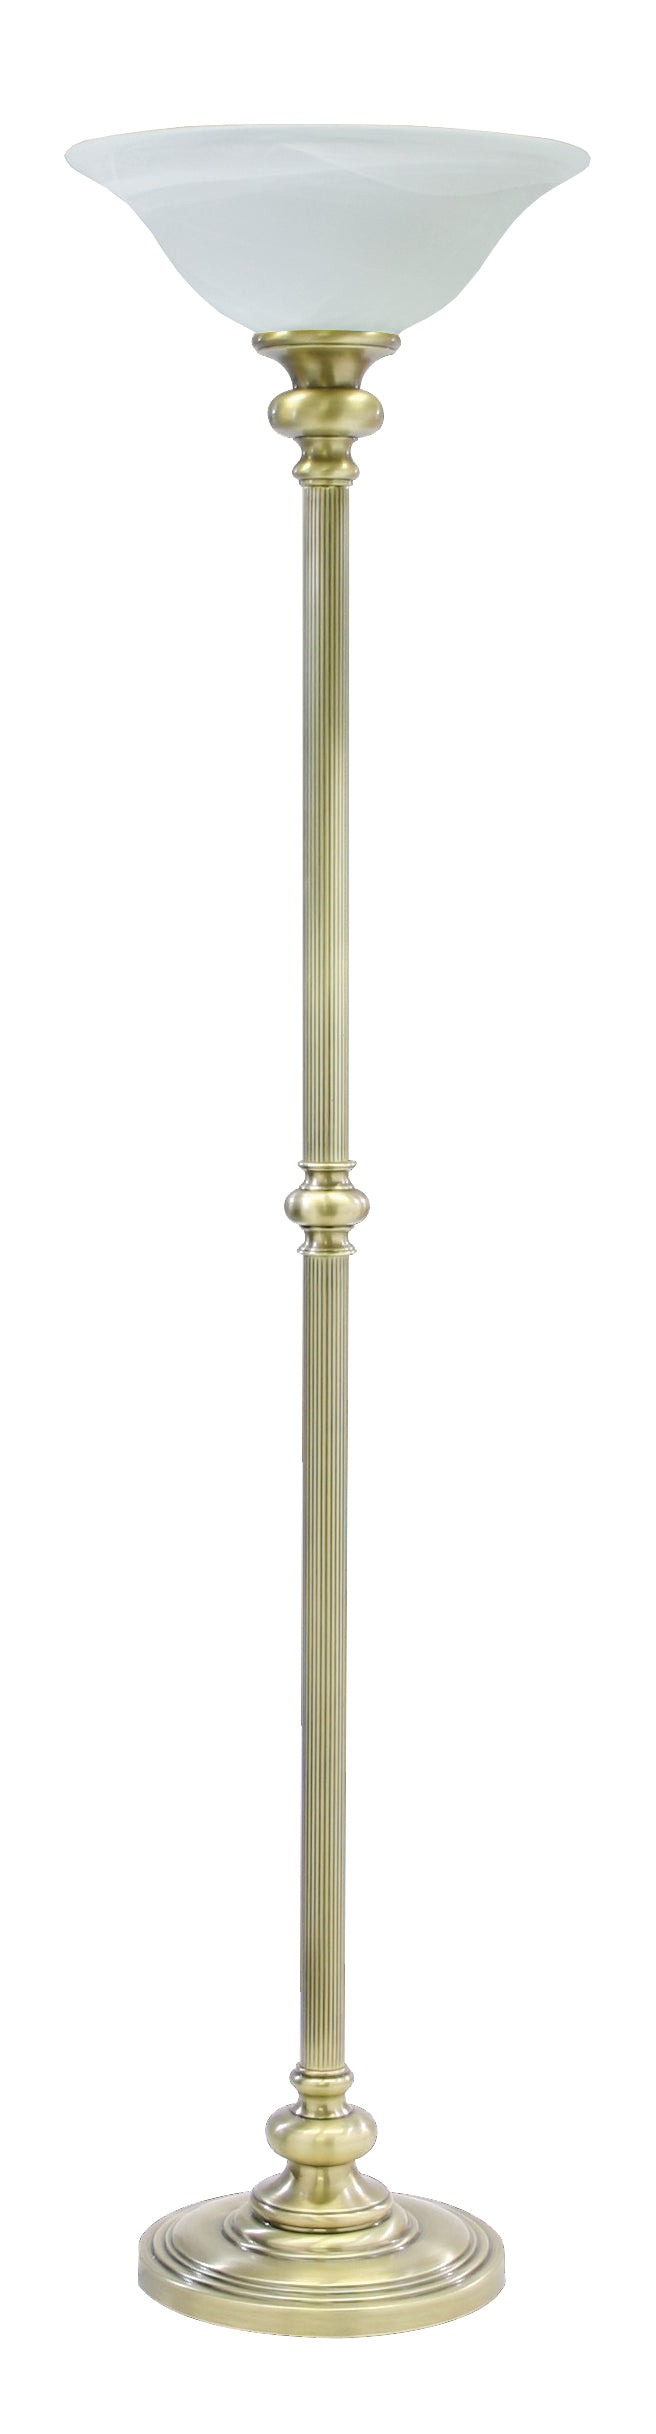 House of Troy Newport 68.75" Floor Lamp Antique Brass N600-AB-O